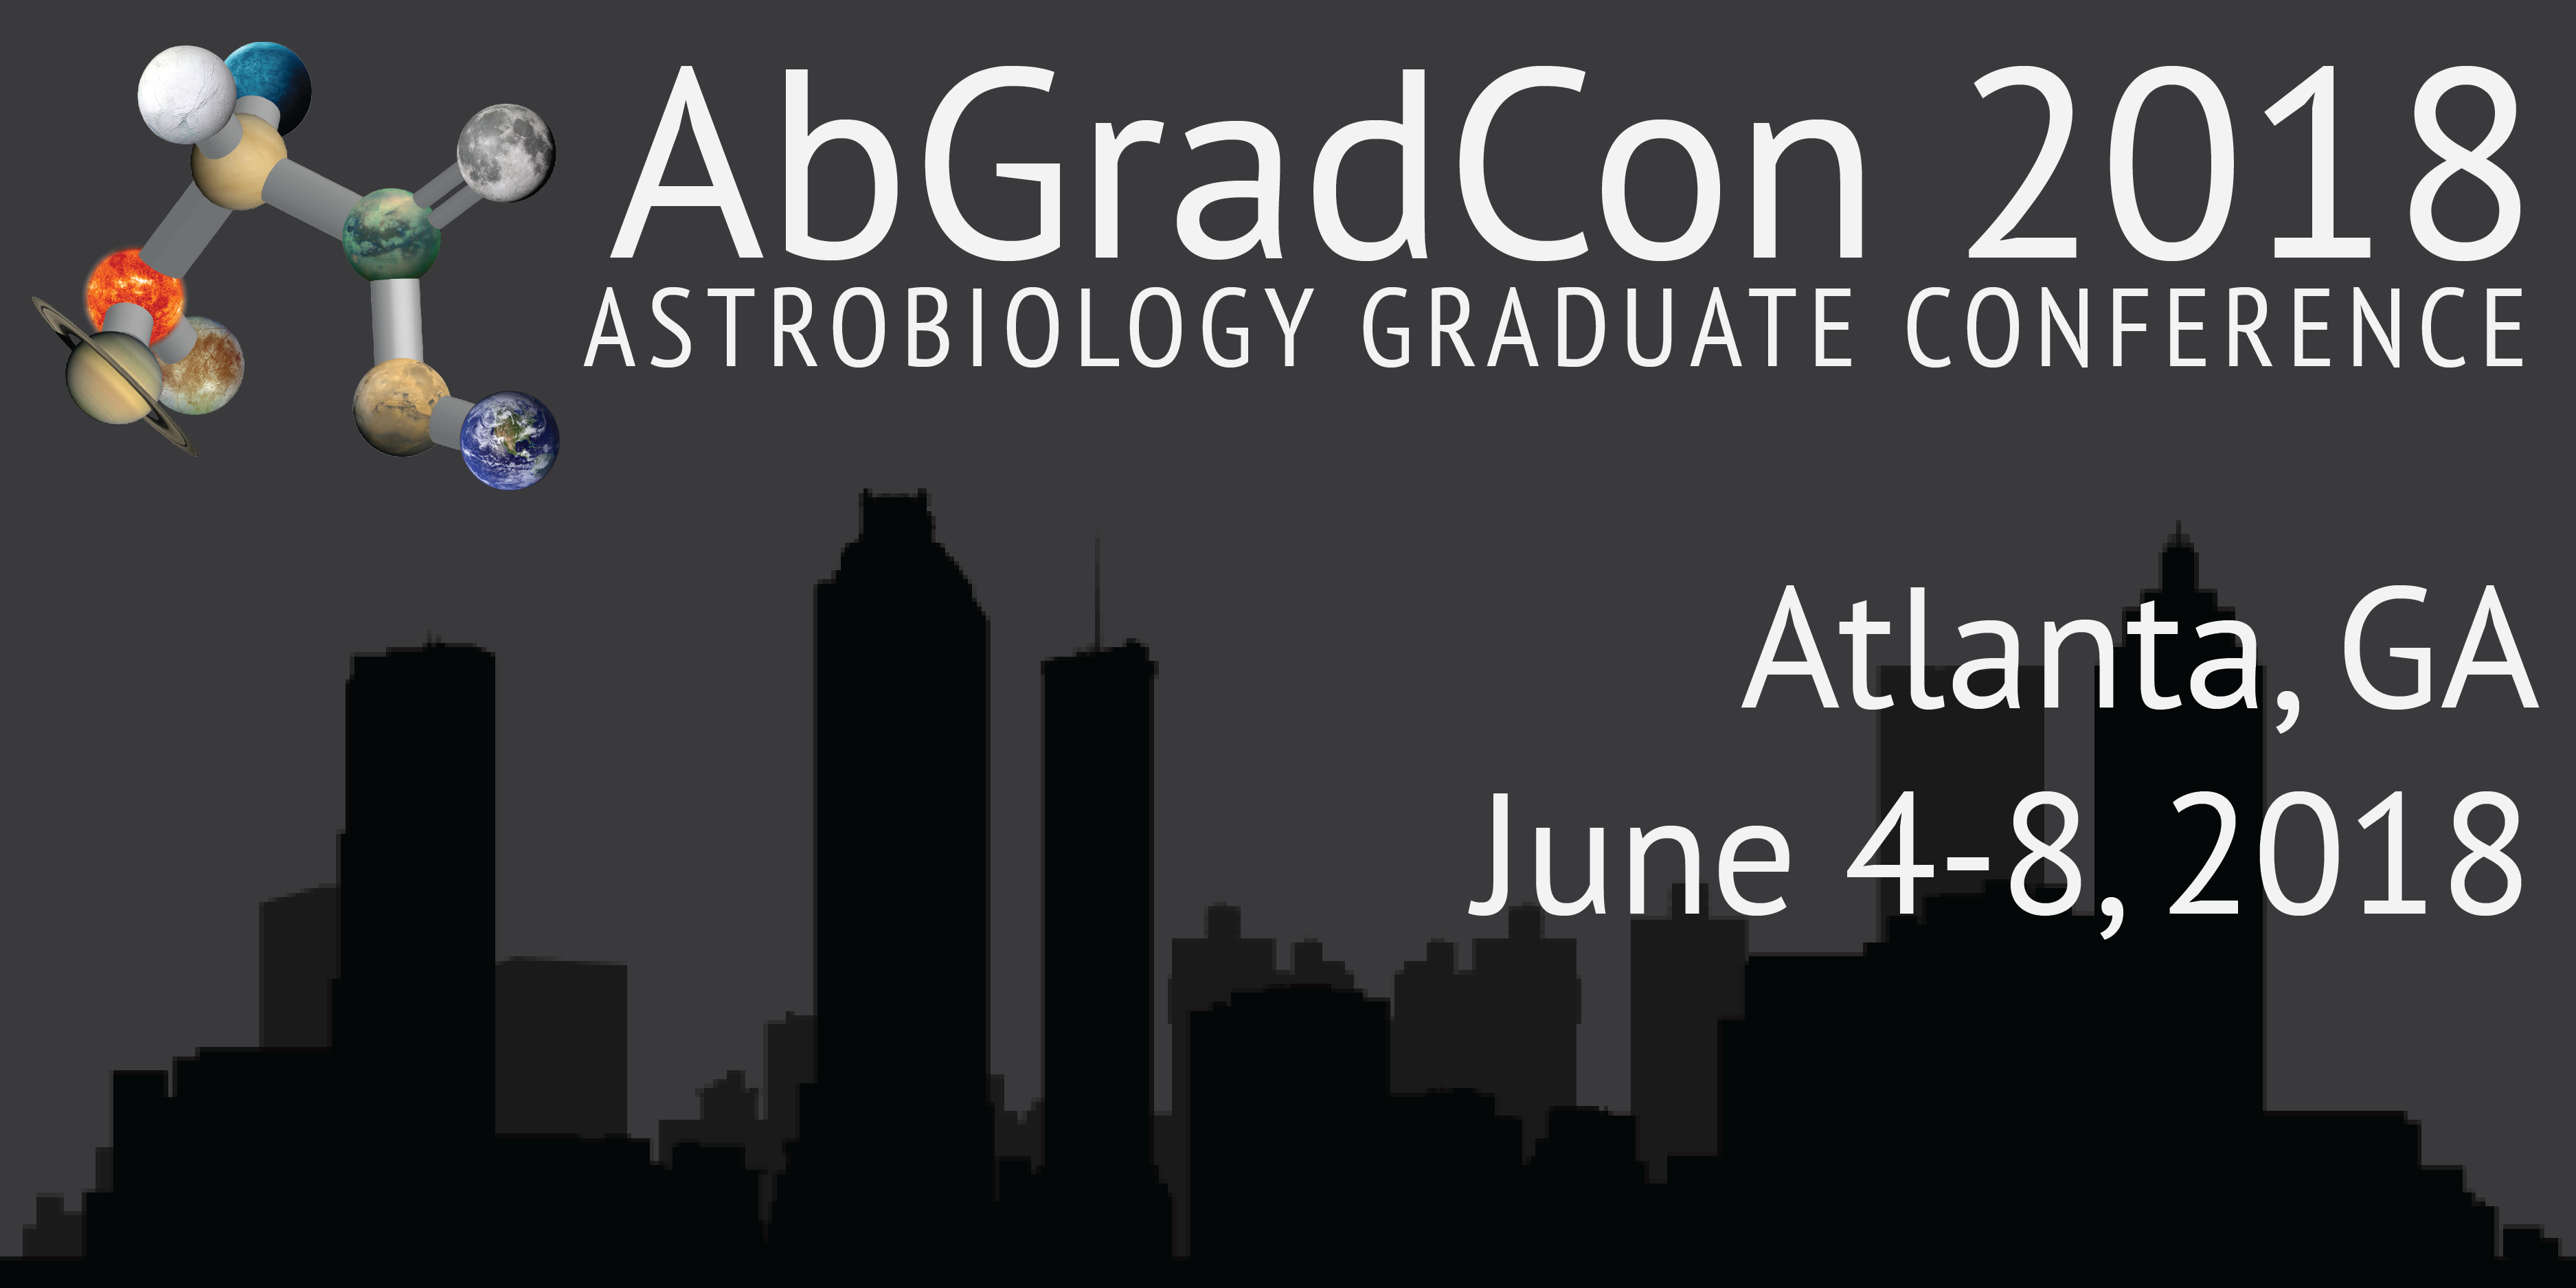 AbGradCon 2018 takes place June 4-8, 2018, preceded by a Proposal Writing Retreat on June 1-4. Source: AbGradCon. Image credit: None